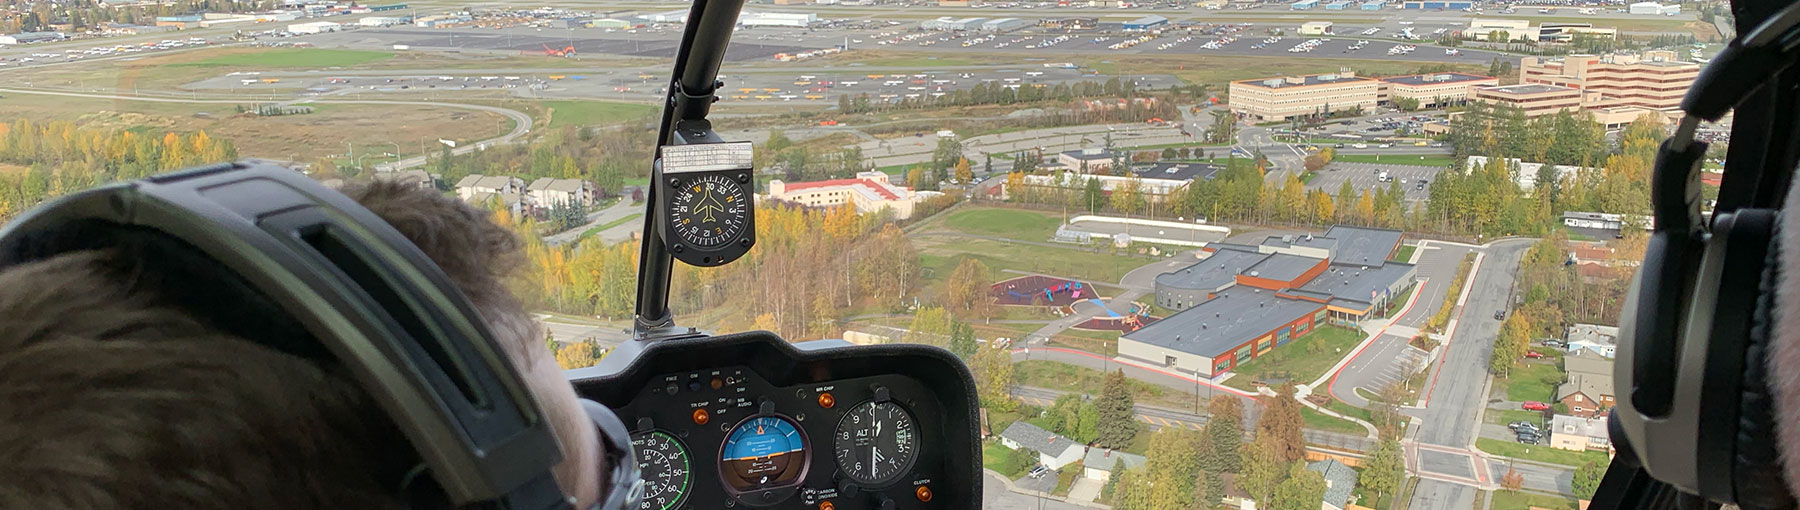 Aerial view of Anchorage Alaska from helicopter cockpit.